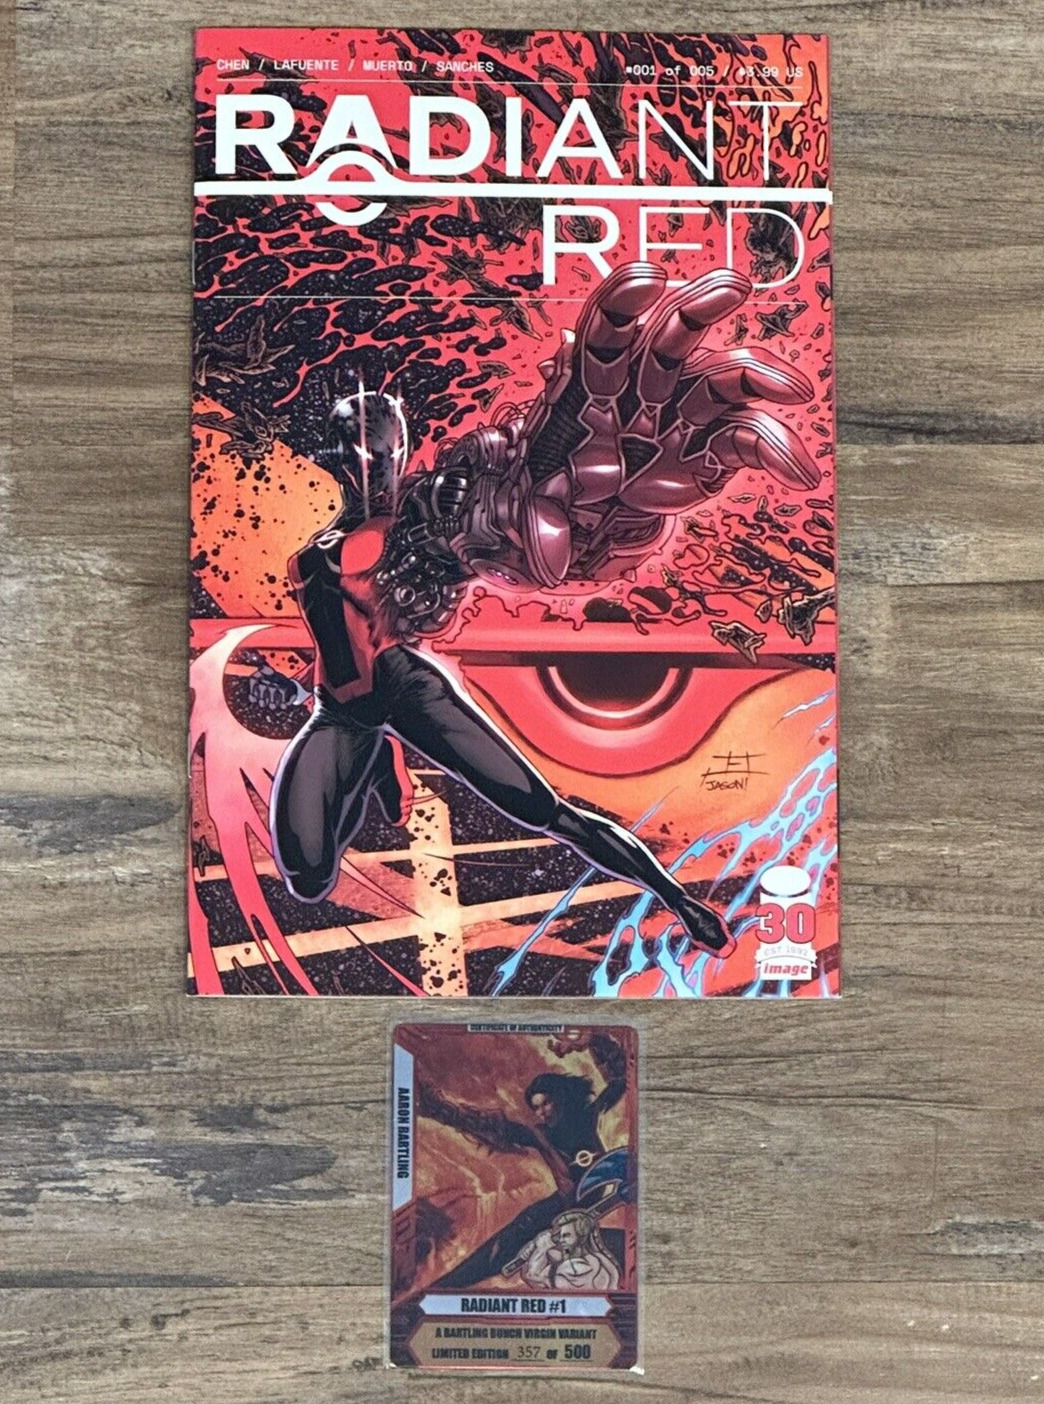 Radiant Red #1 - Jeff Edwards Exclusive Variant- Limited to 500 with COA Card